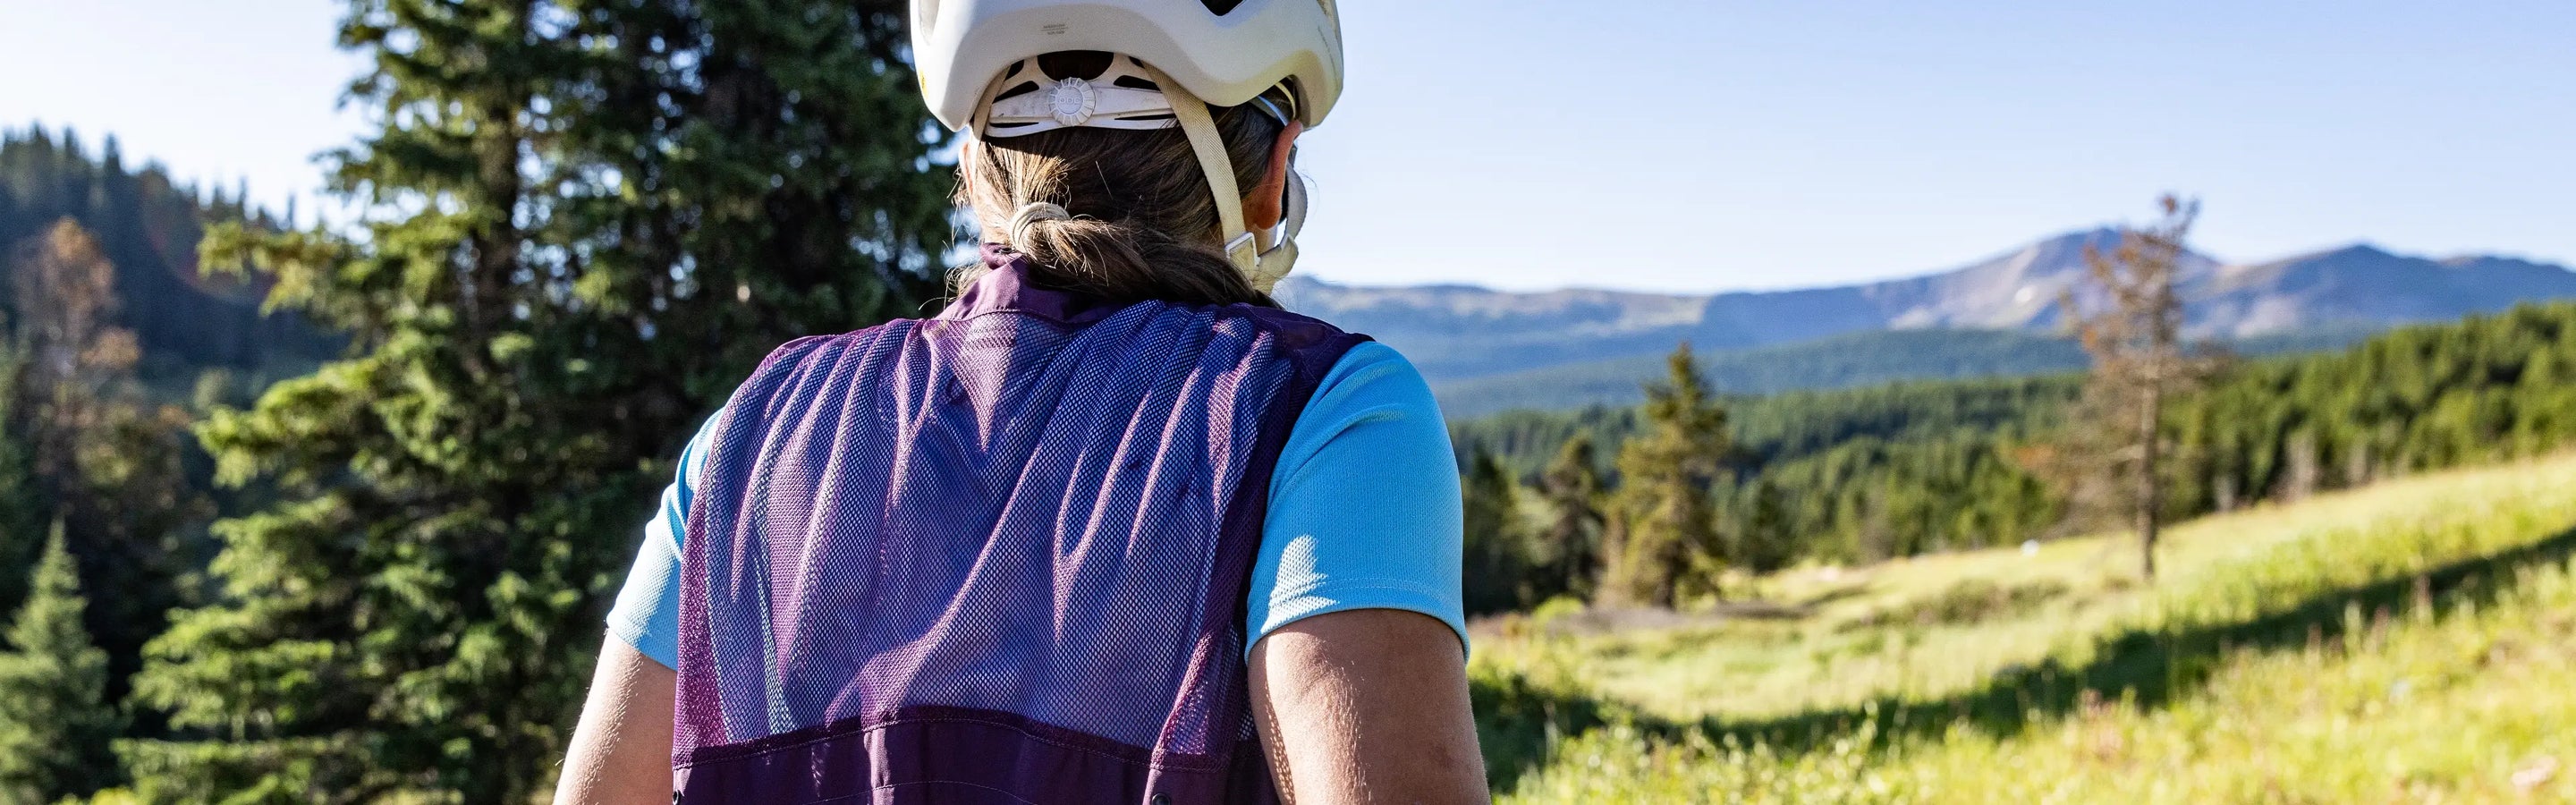 Women's Road Cycling Jackets & Vests